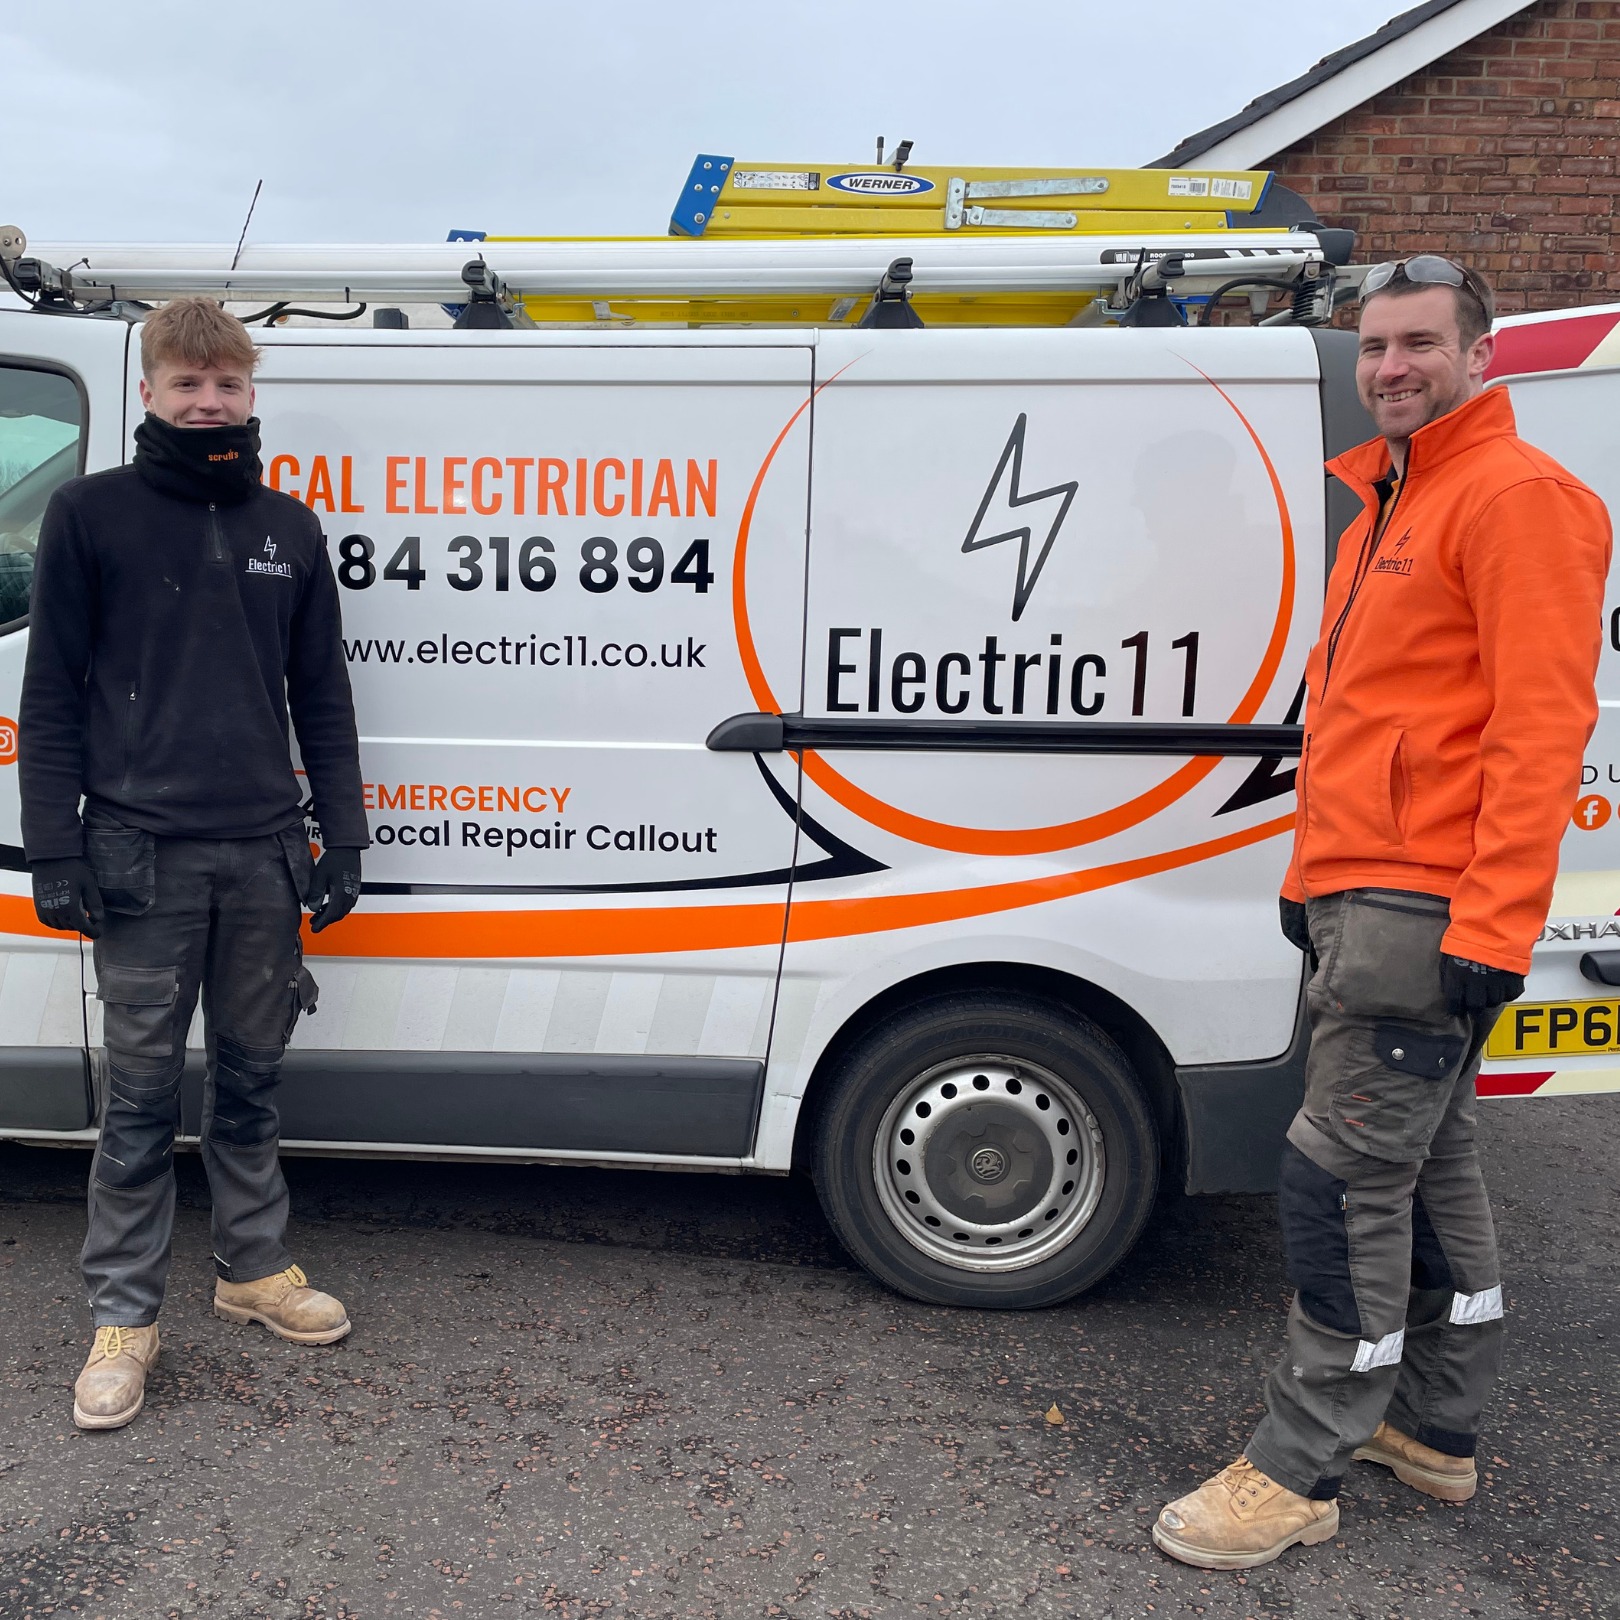 Local Electrician in Attleborough: An Introduction to Electric11